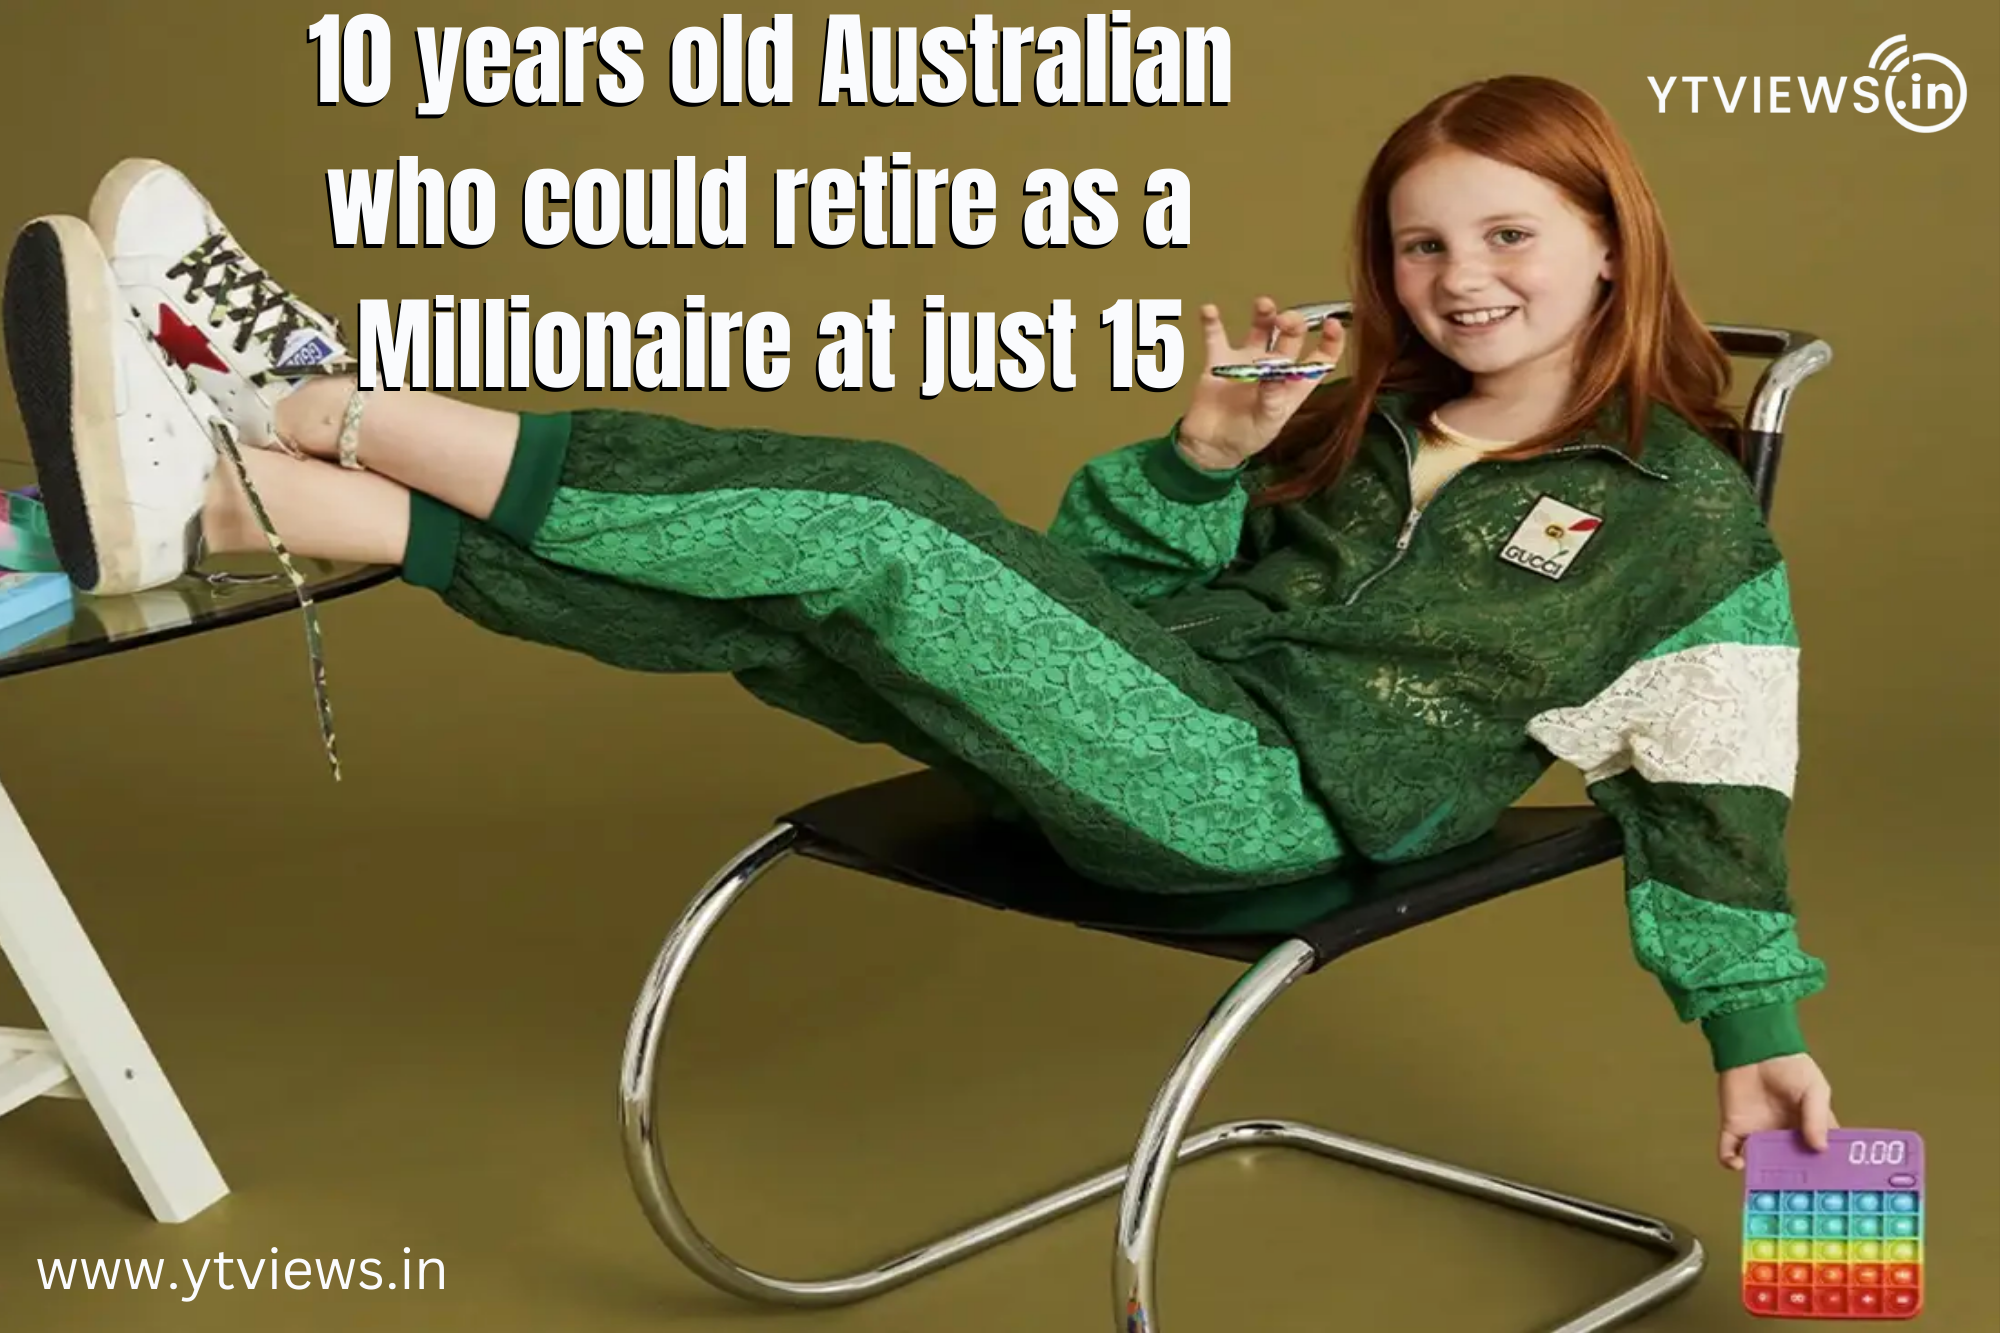 10 year old Australian who could retire as a millionaire at just 15